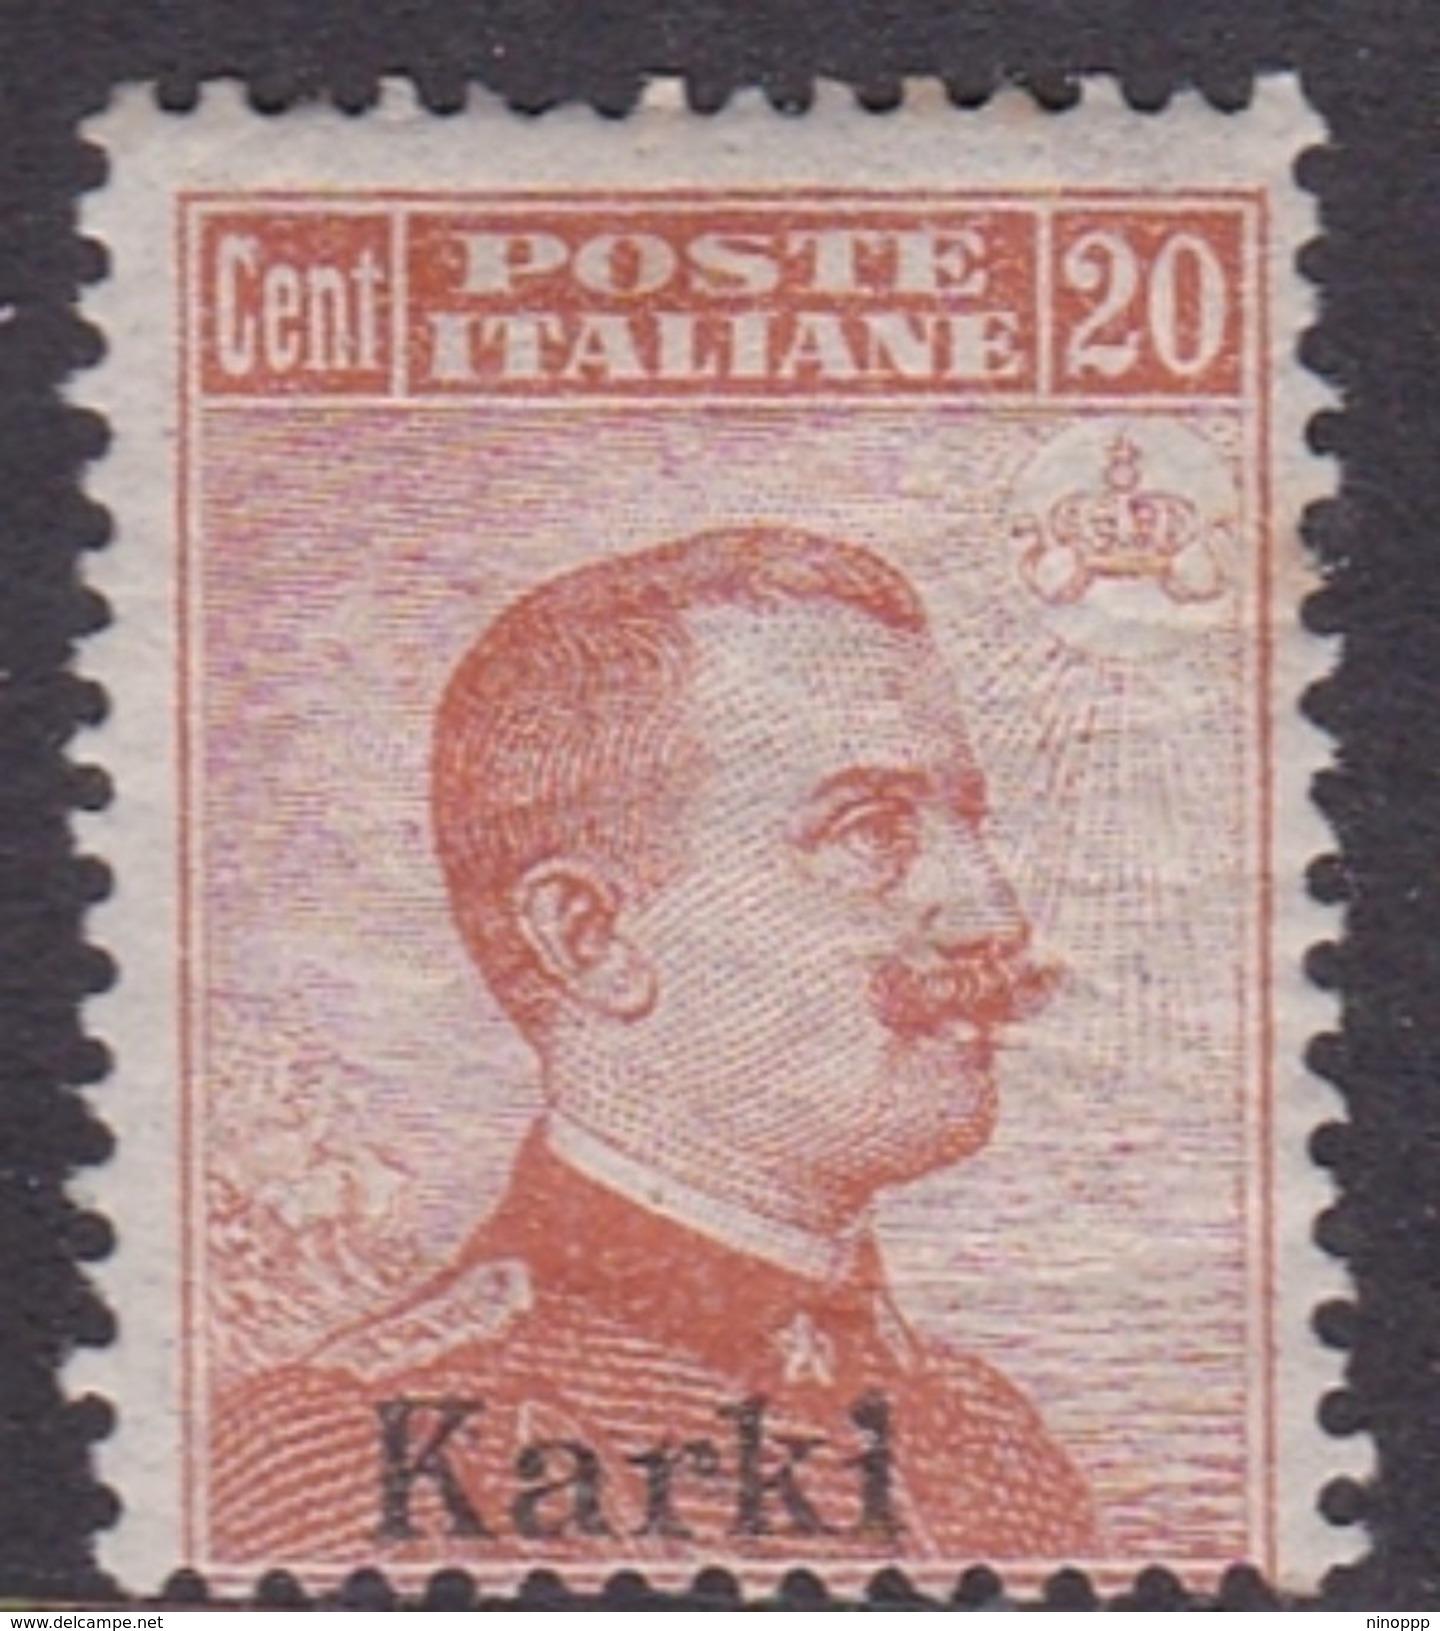 Italy-Colonies And Territories-Aegean-Carchi S 9 1917 20c Brown Orange No Watermark MNH - Aegean (Carchi)